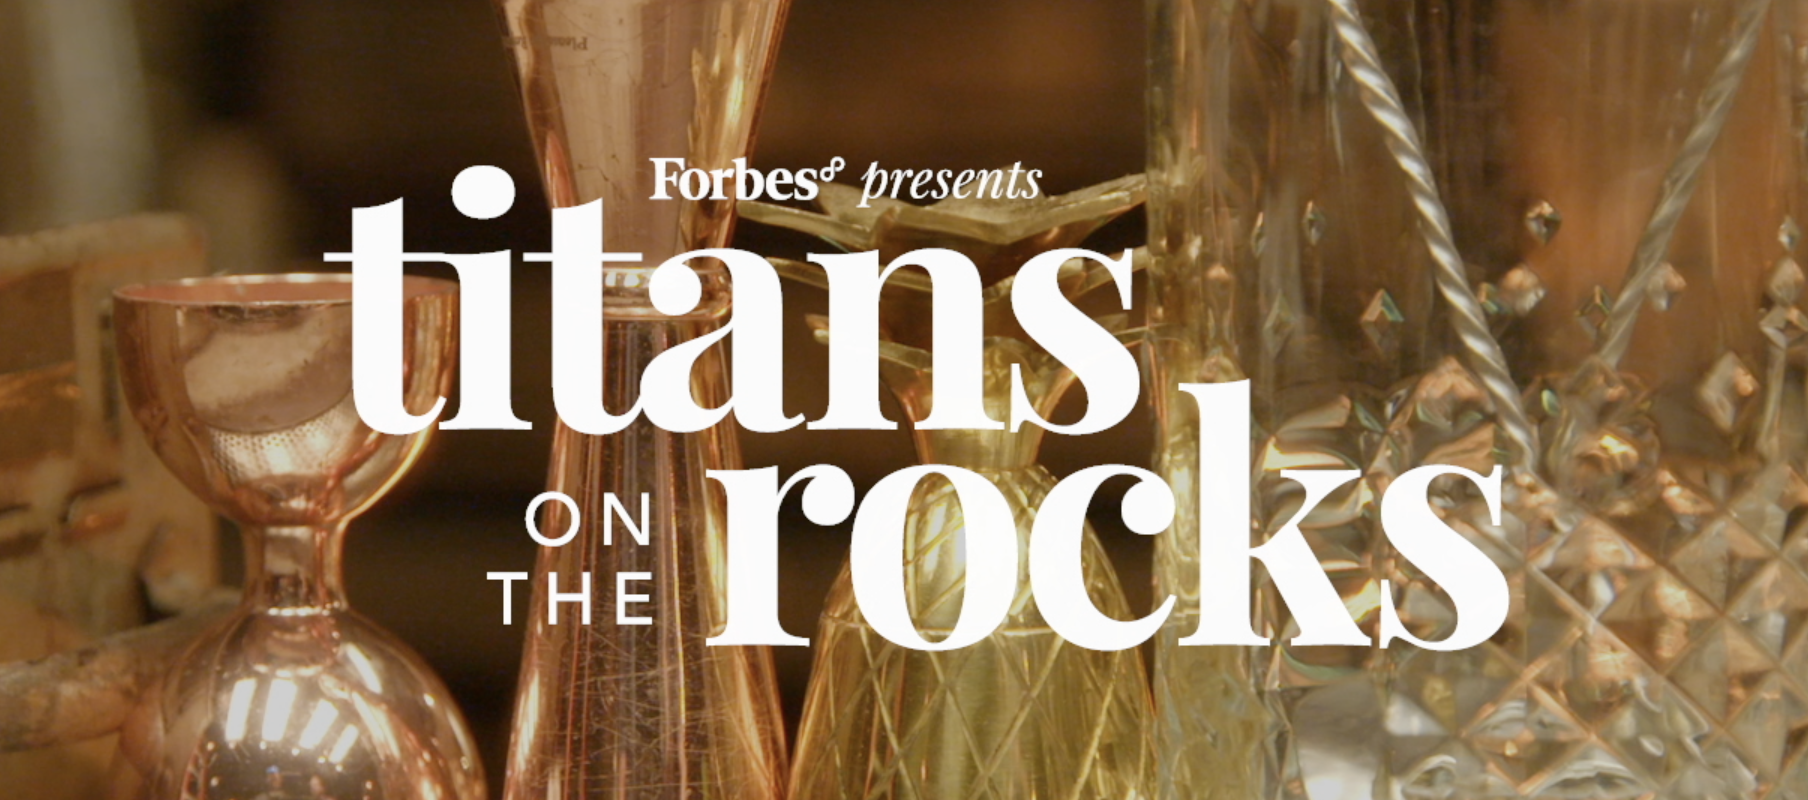 Forbes premieres Titans on the Rocks produced by Miller/Datri Entertainment